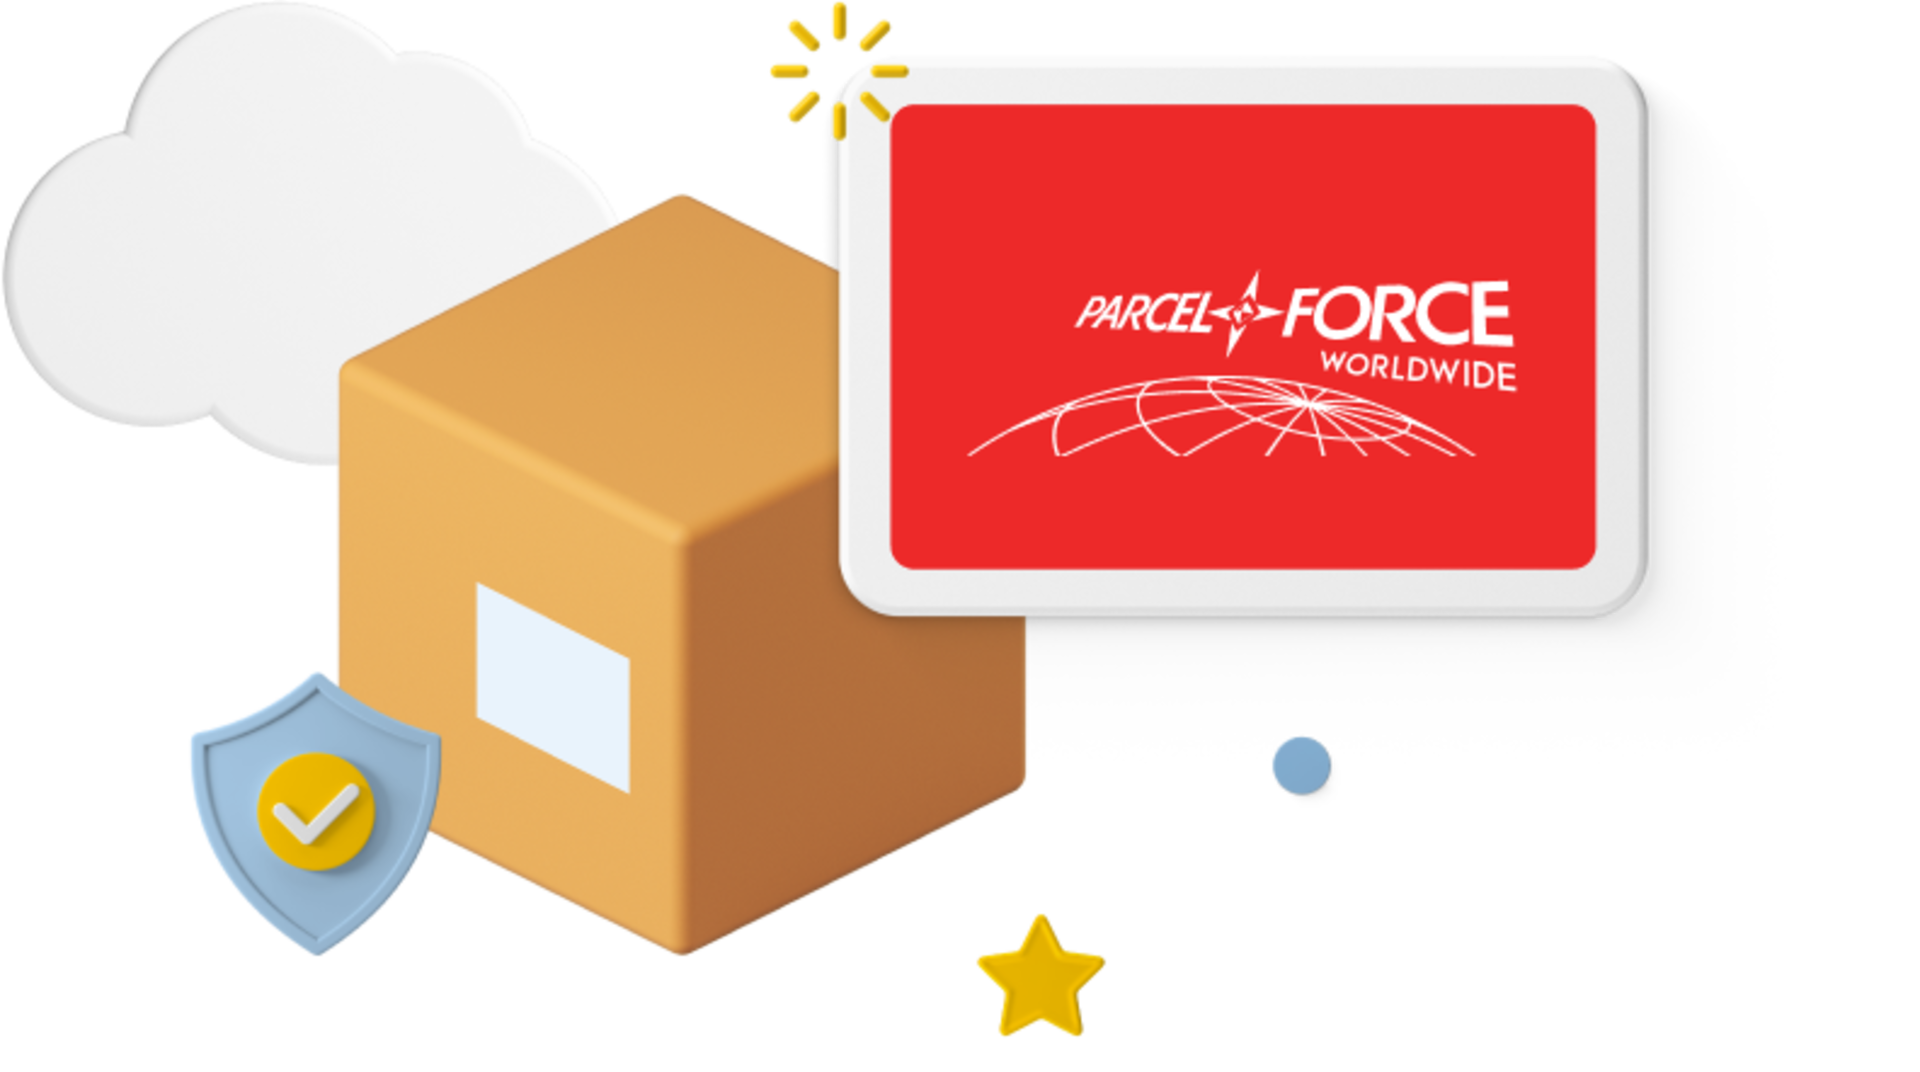 Animated box with Parcelforce logo and icons